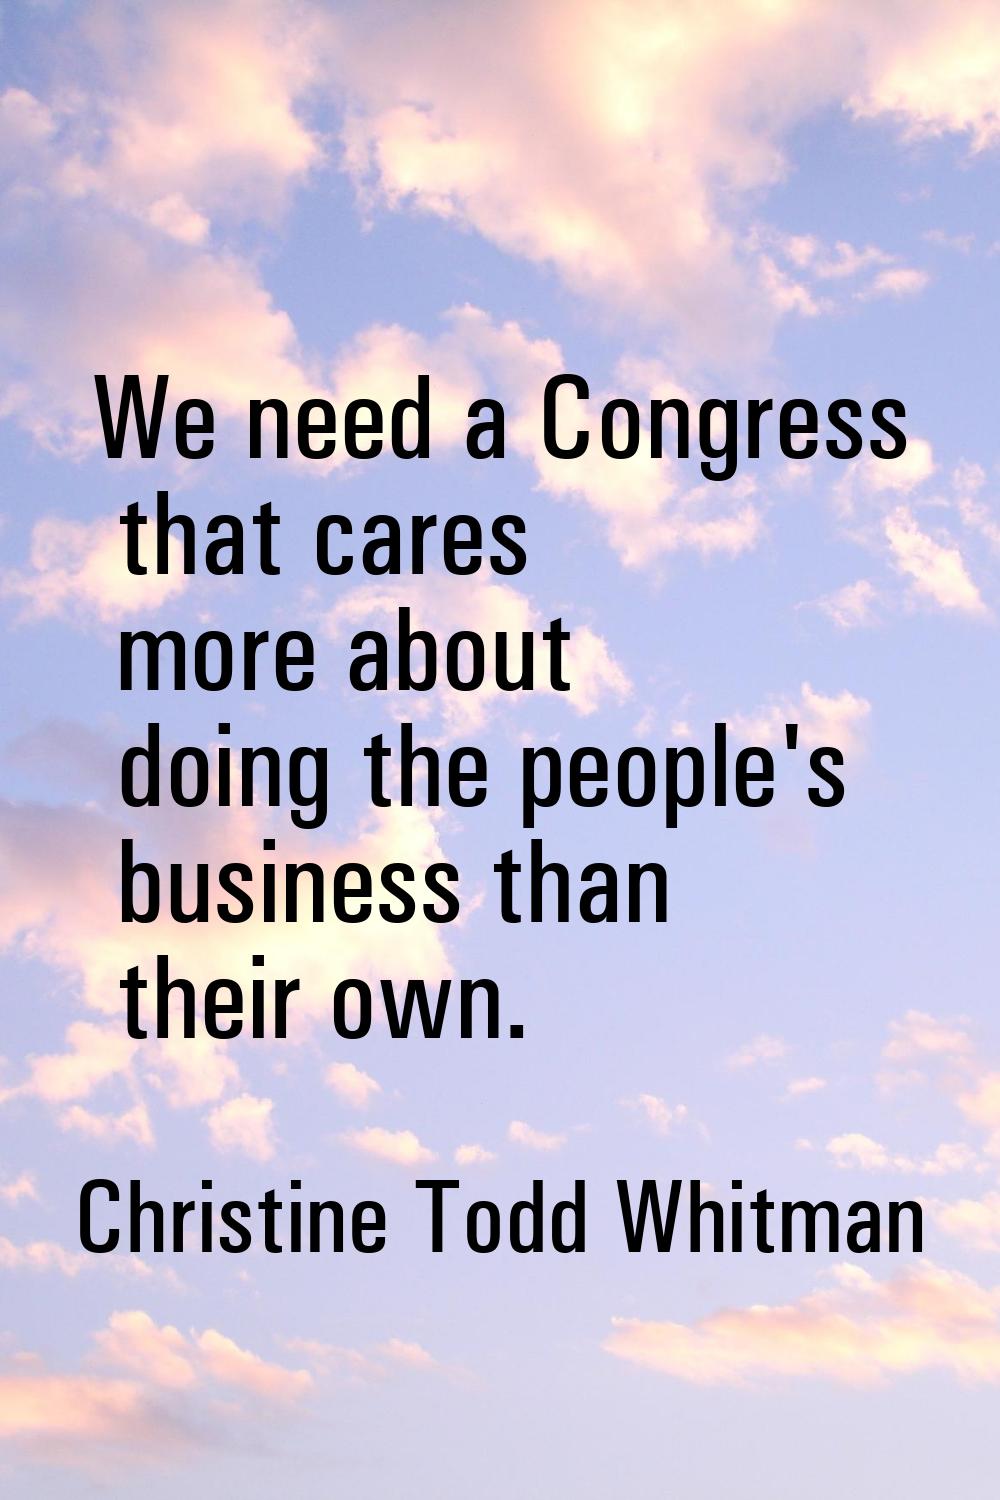 We need a Congress that cares more about doing the people's business than their own.